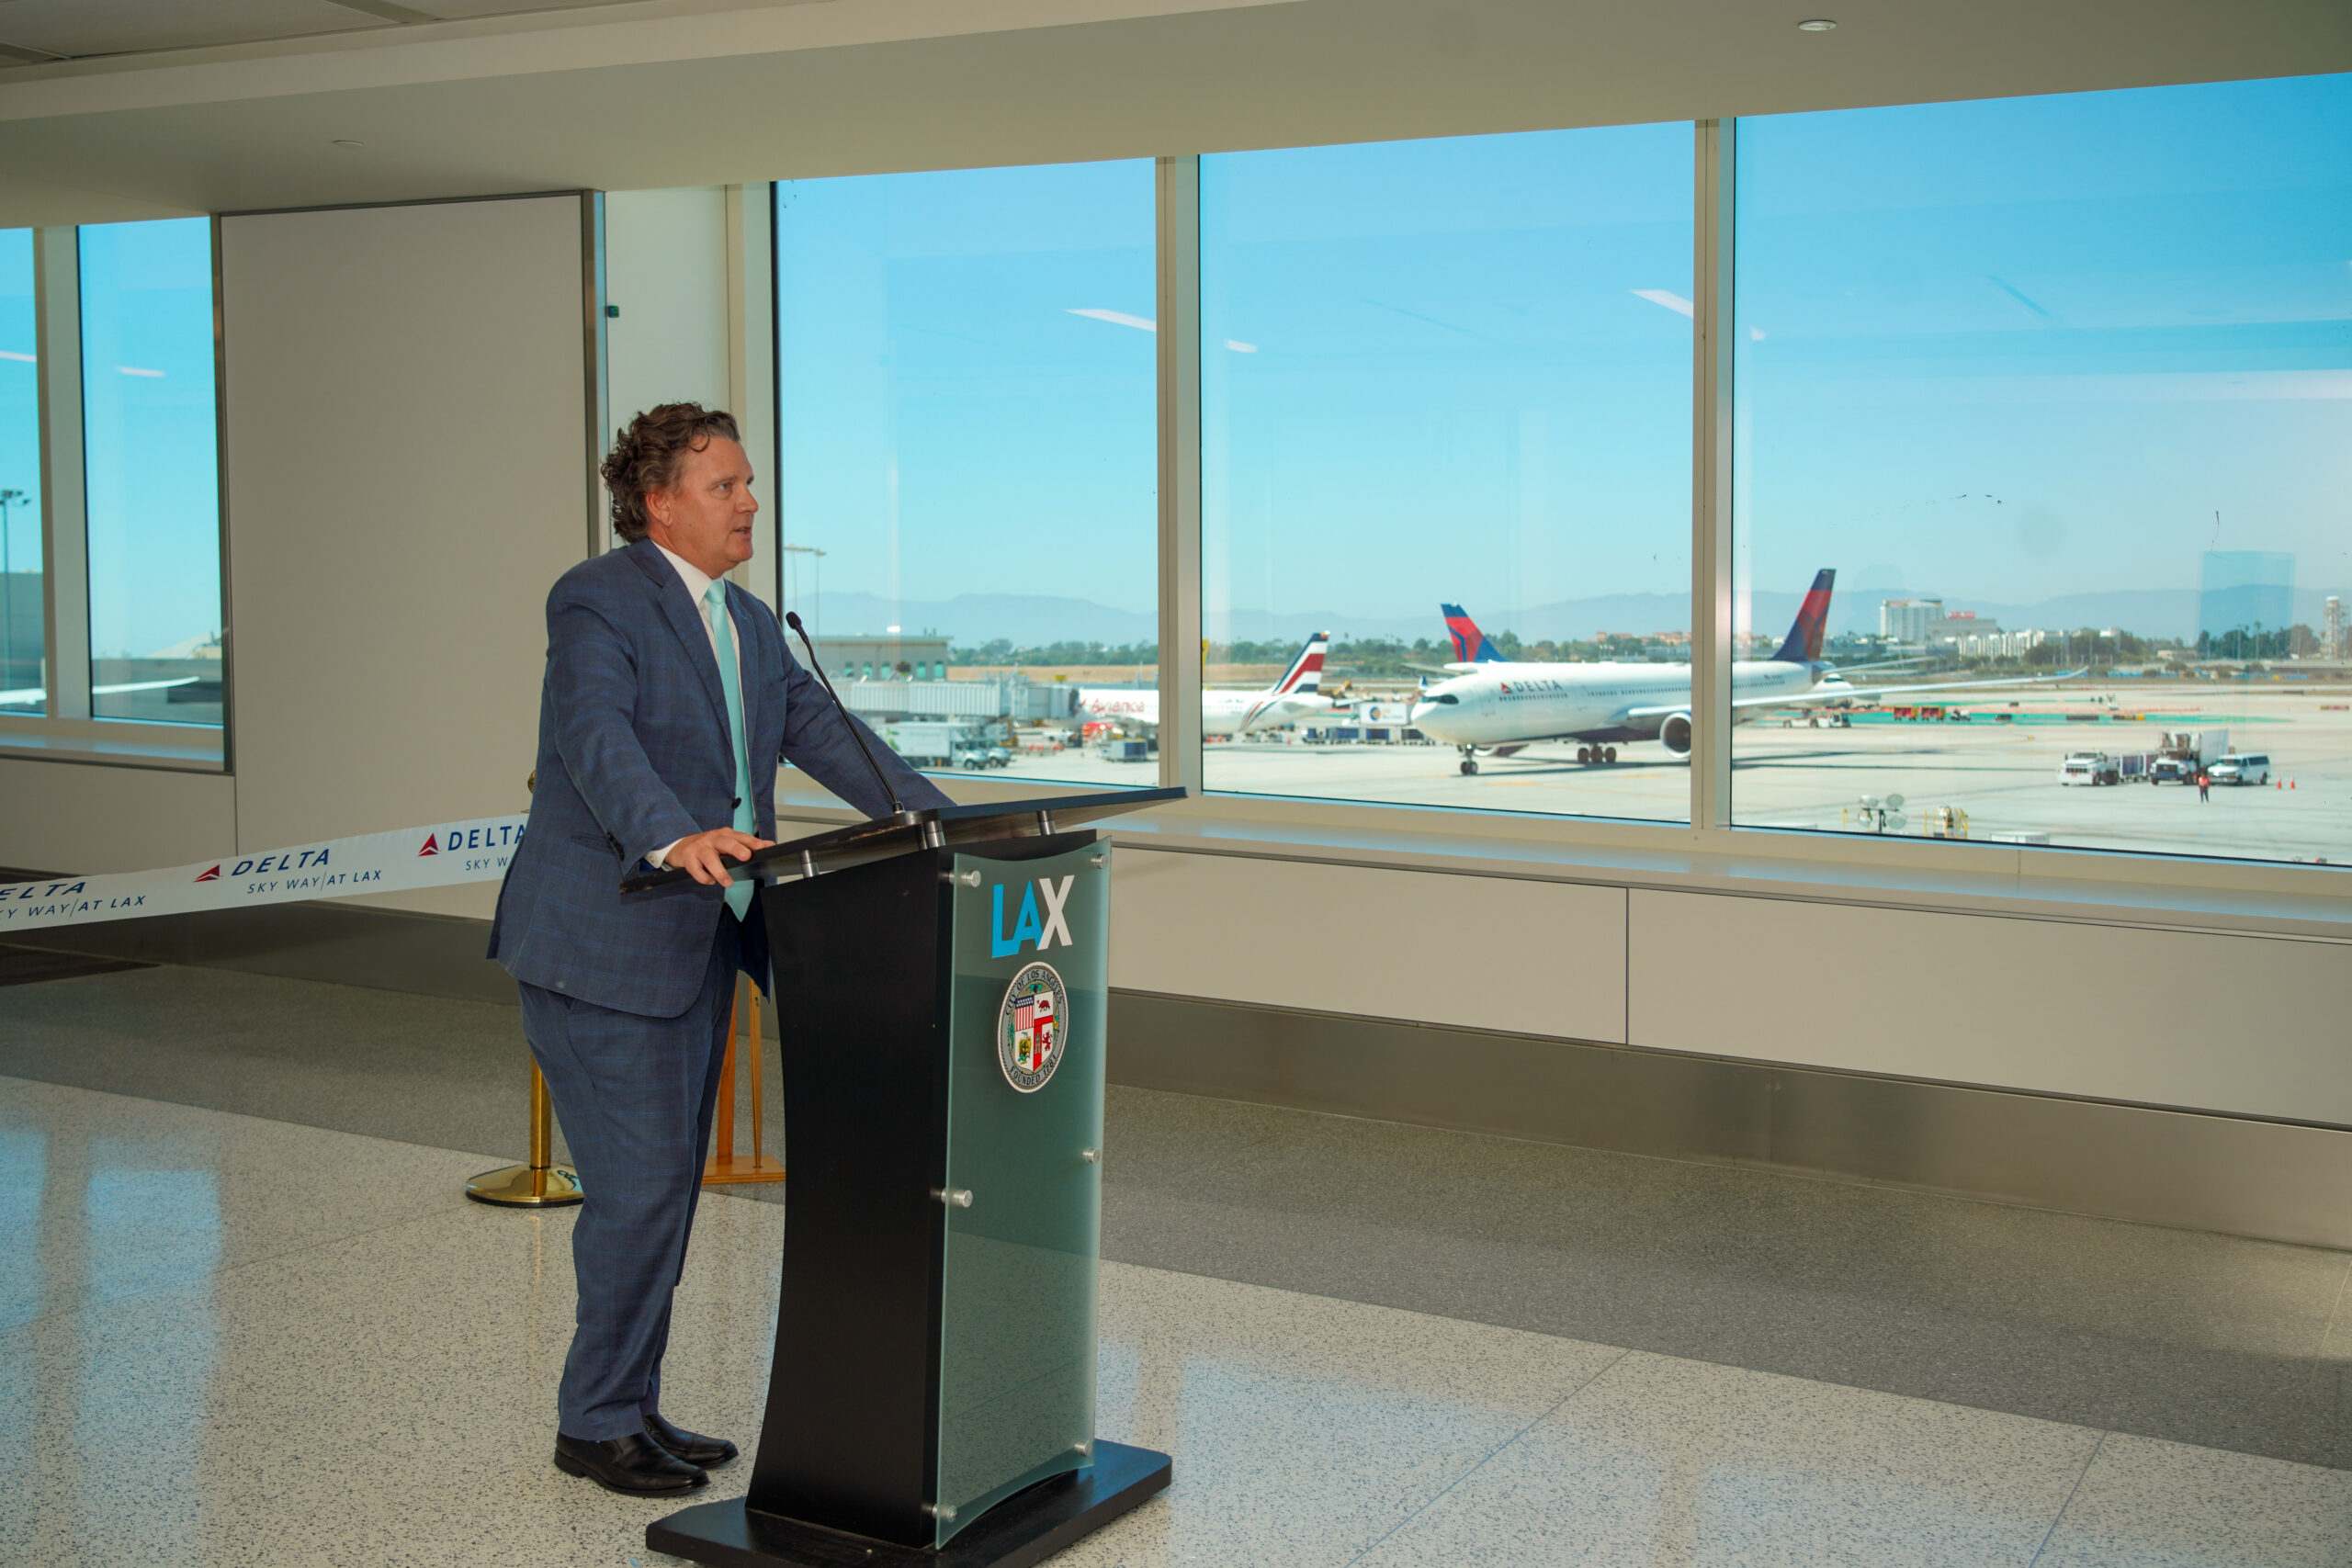 The project’s ribbon cutting ceremony took place in the new passageway, allowing attendees to experience the connector’s time-saving convenience with views of LAX’s north airfield